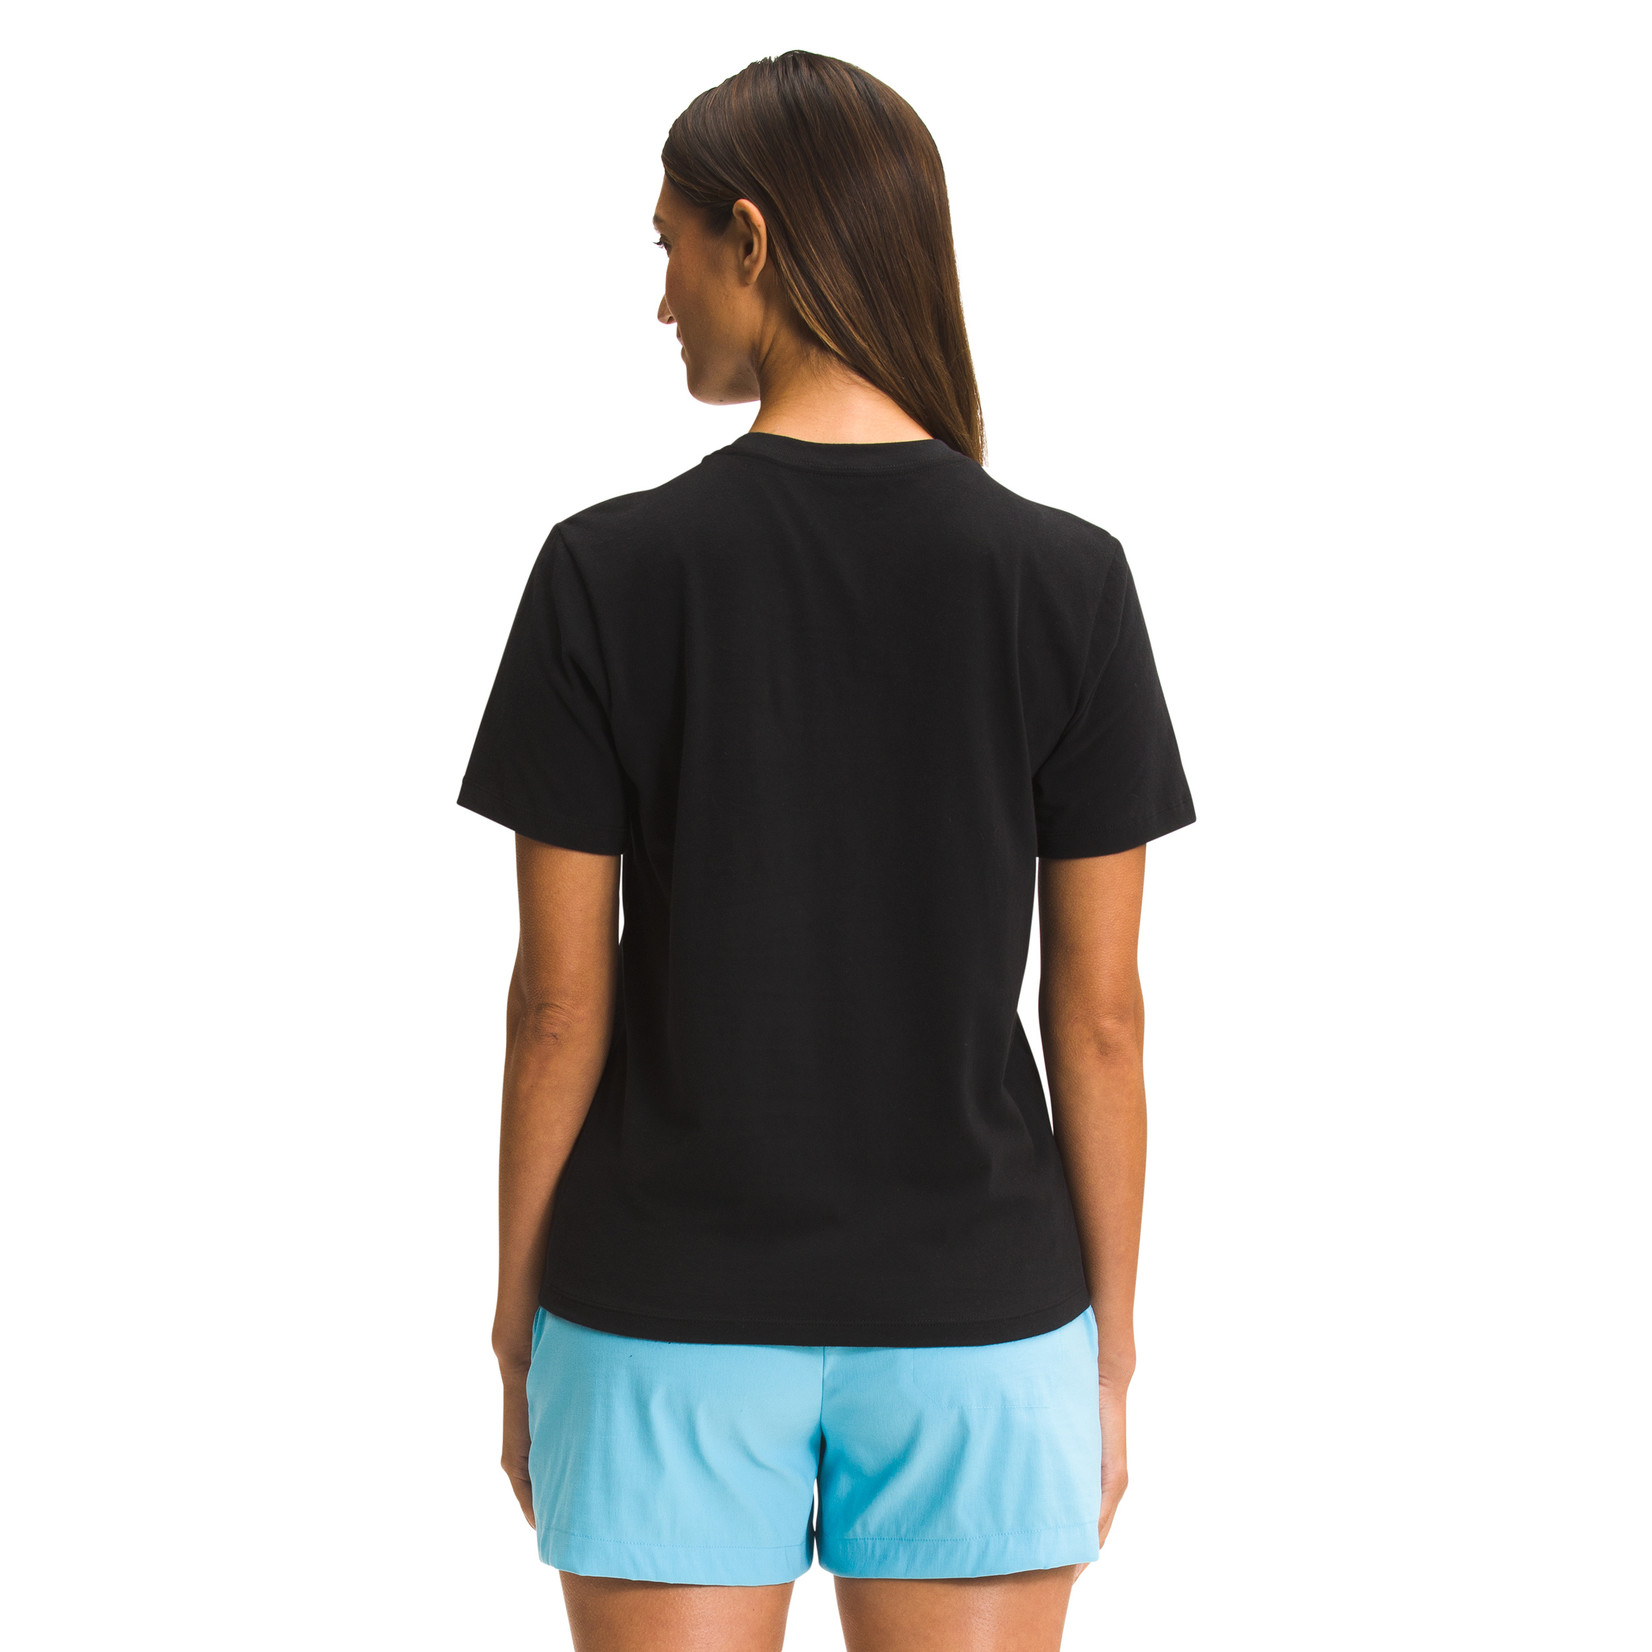 The North Face The North Face Women's Shadow Box T Shirt